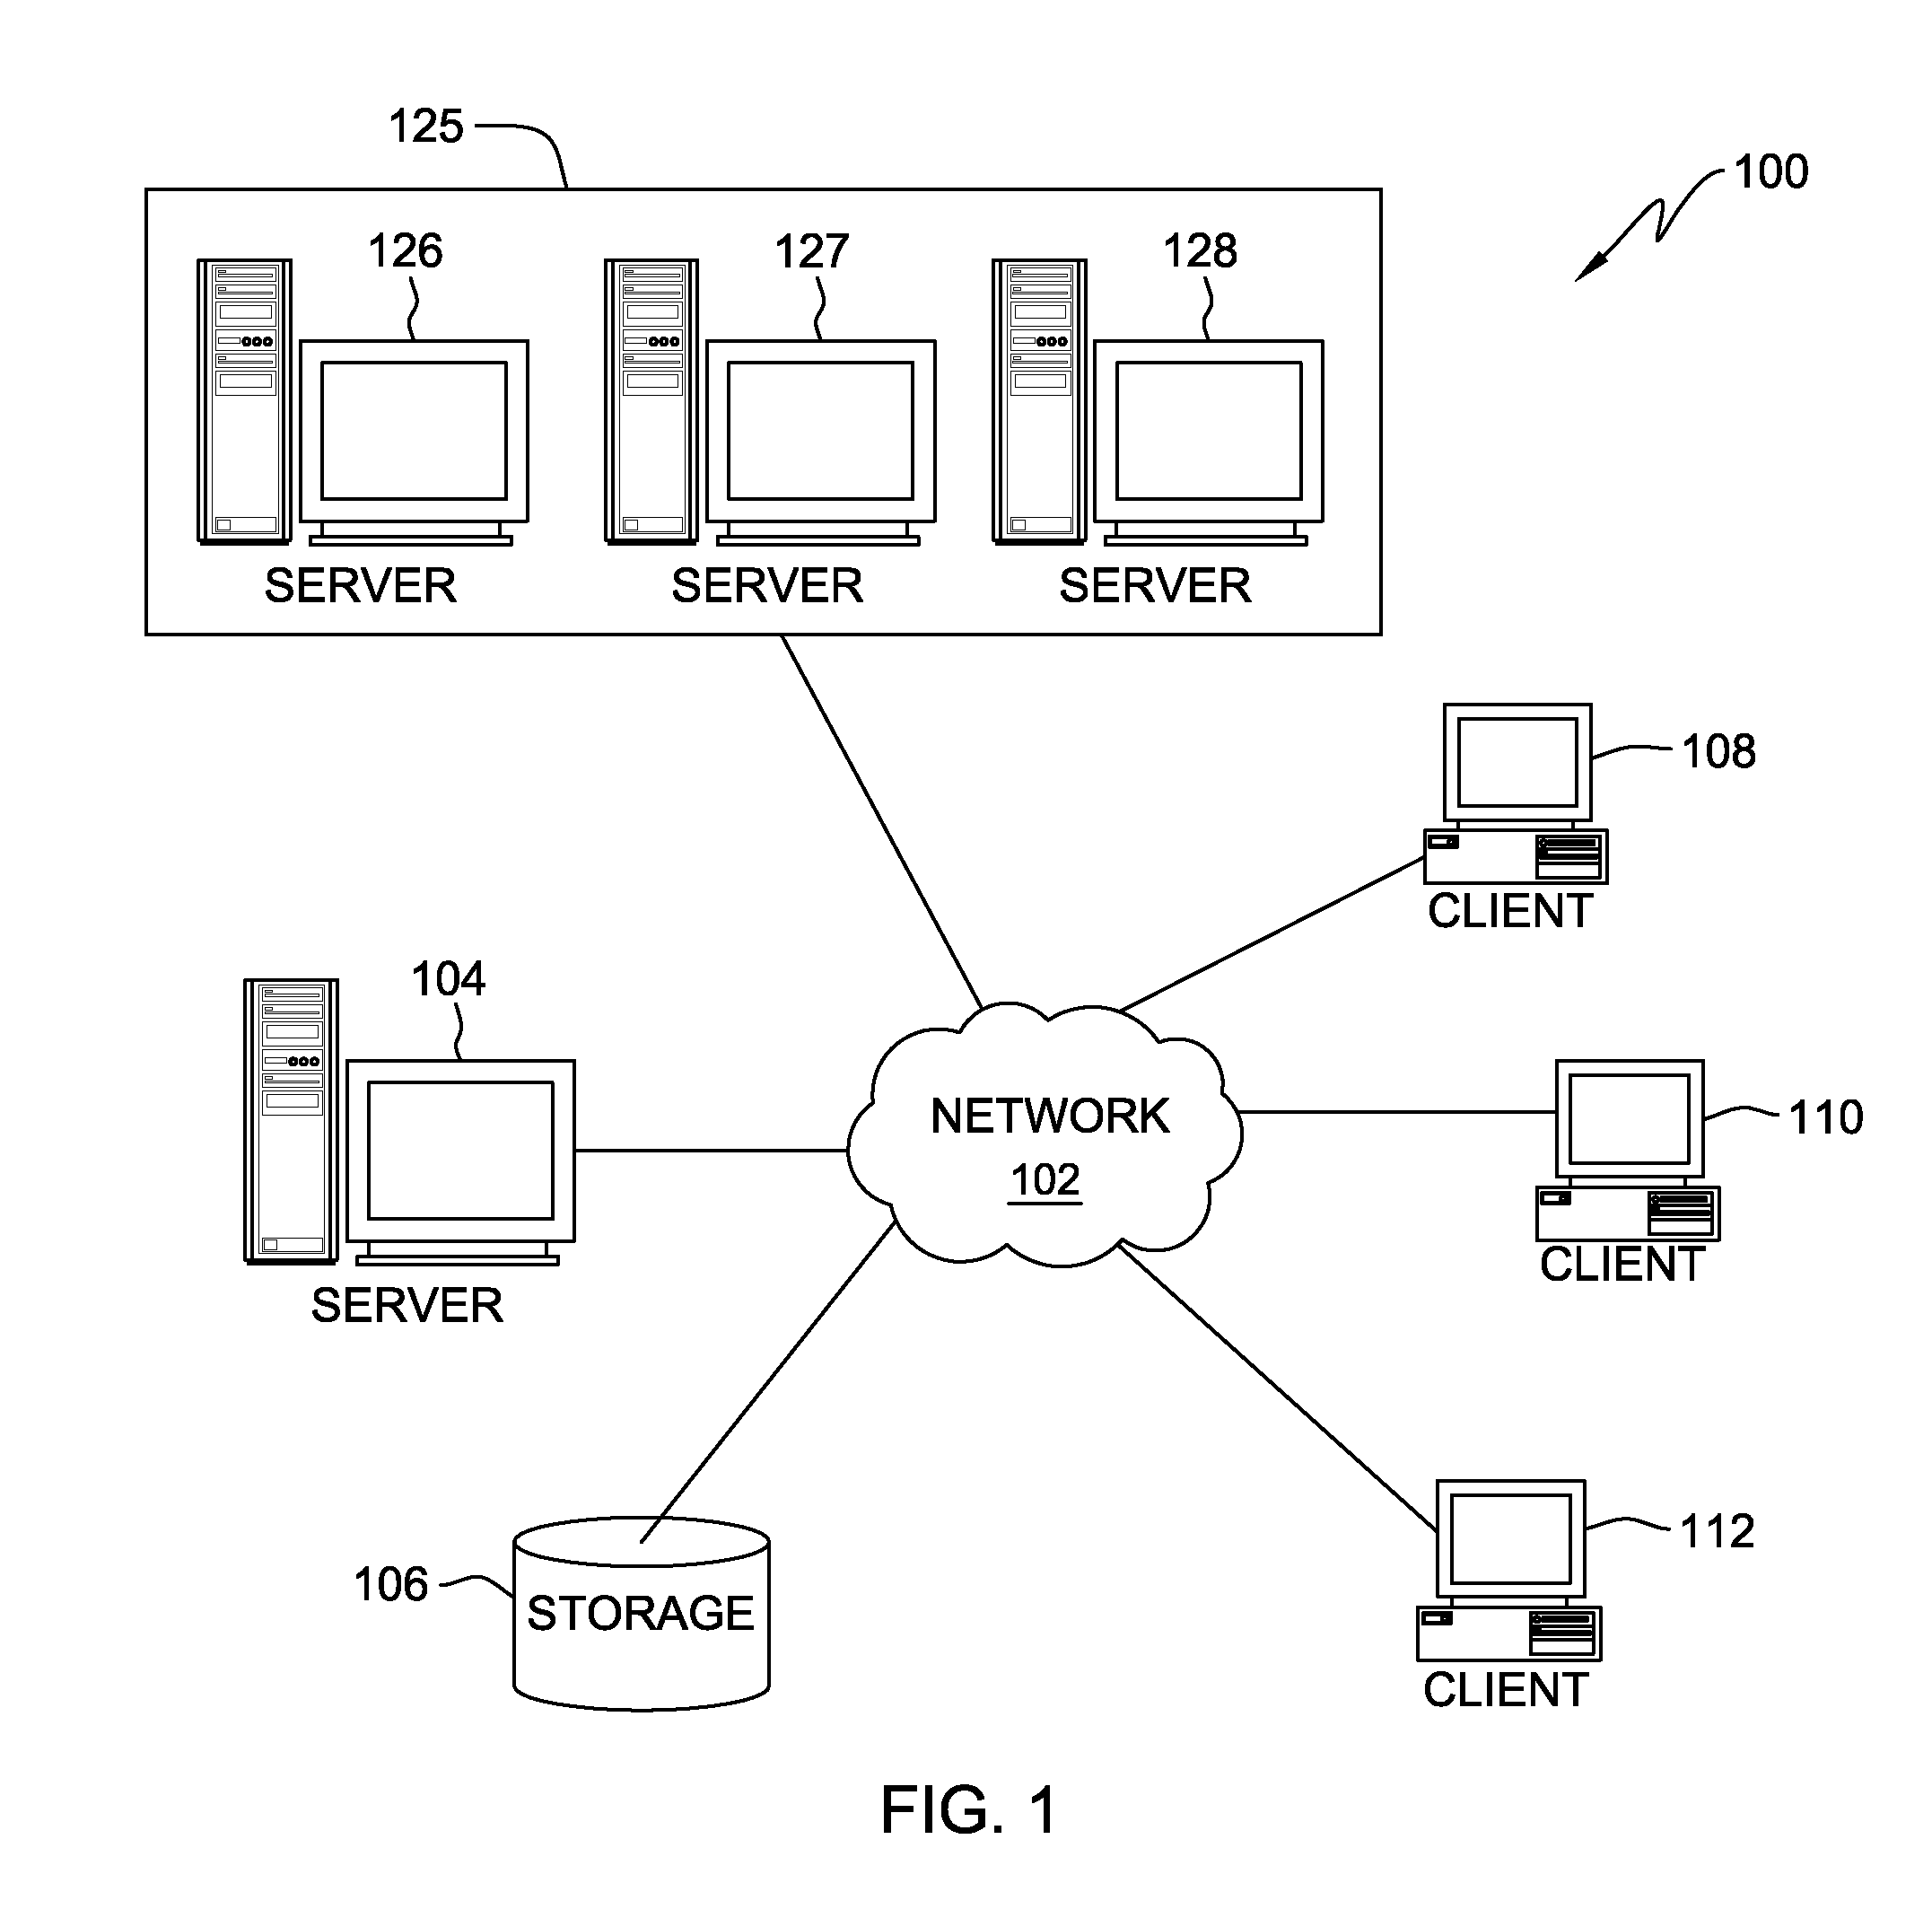 Method for deploying a probing environment for provisioned services to recommend optimal balance in service level agreement user experience and environmental metrics